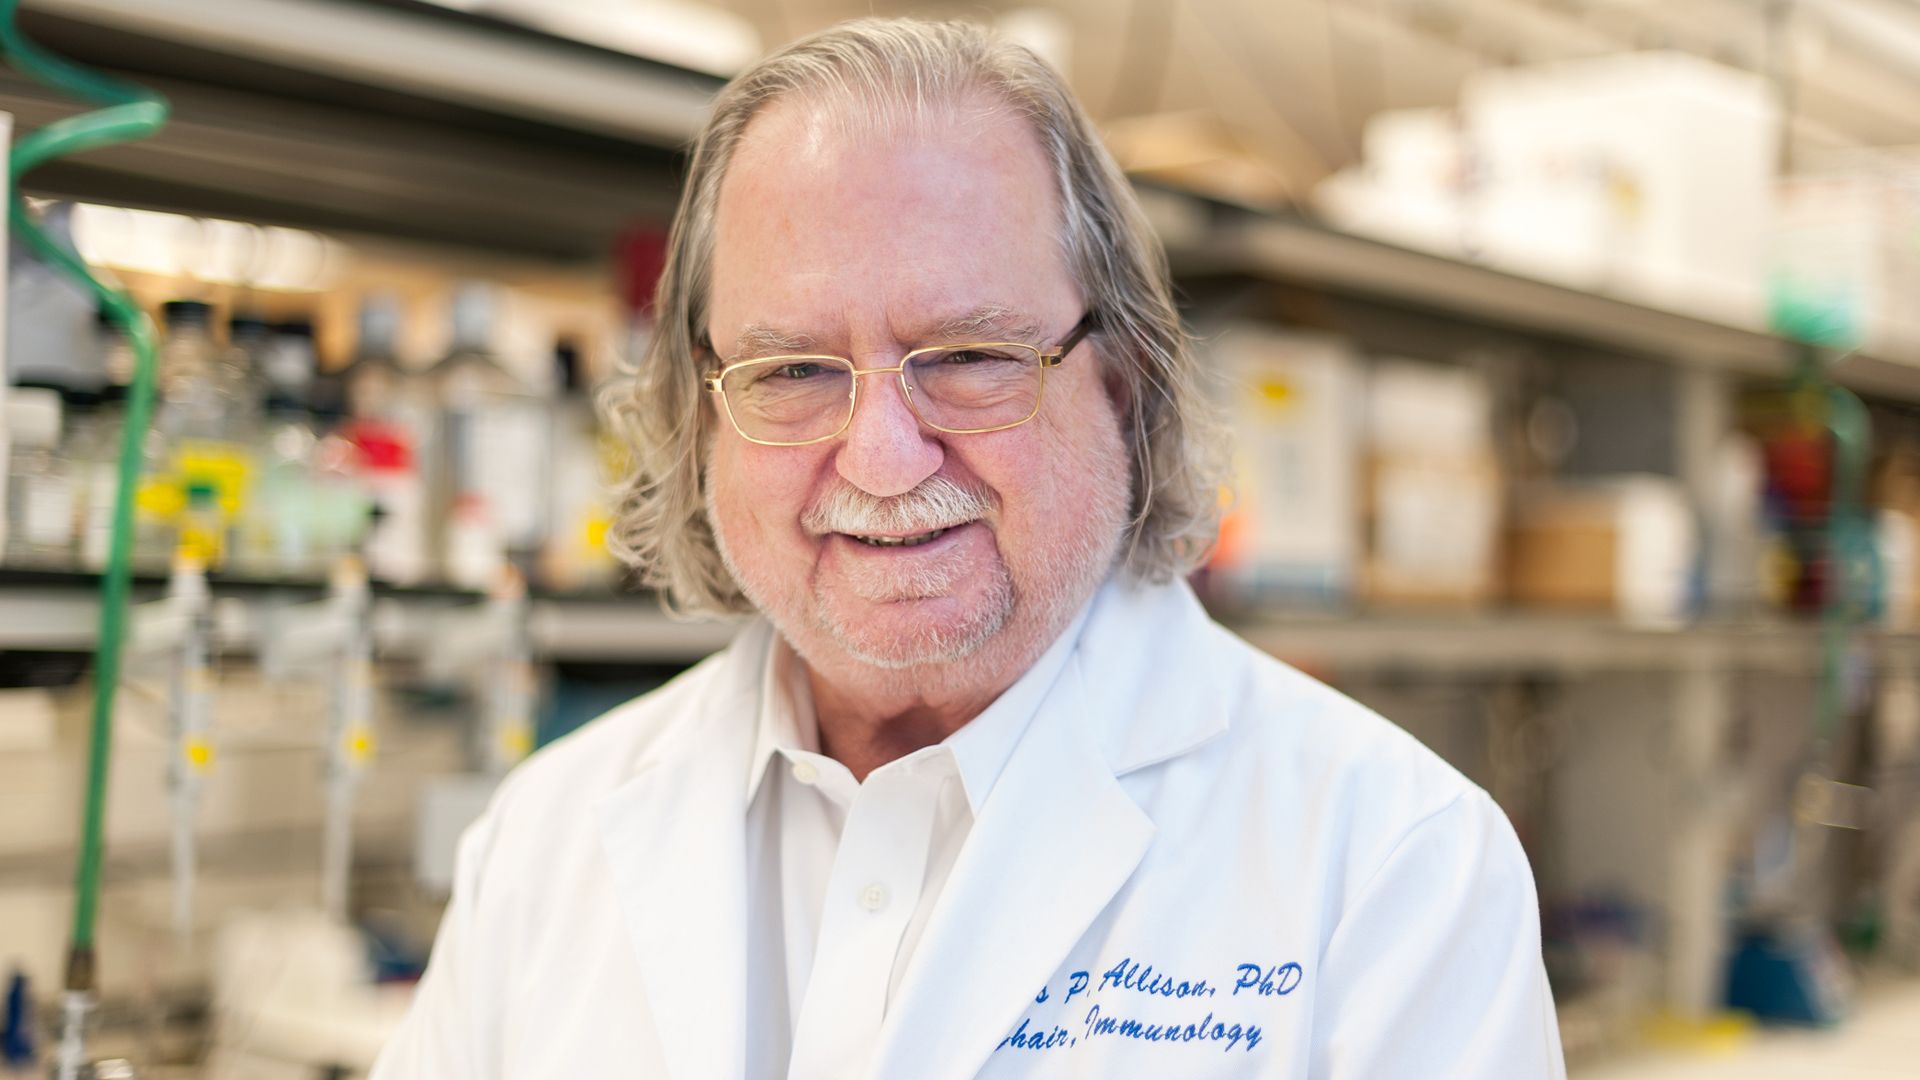 Photo of Jim Allison, who won the 2018 Nobel Prize, in his lab coat.